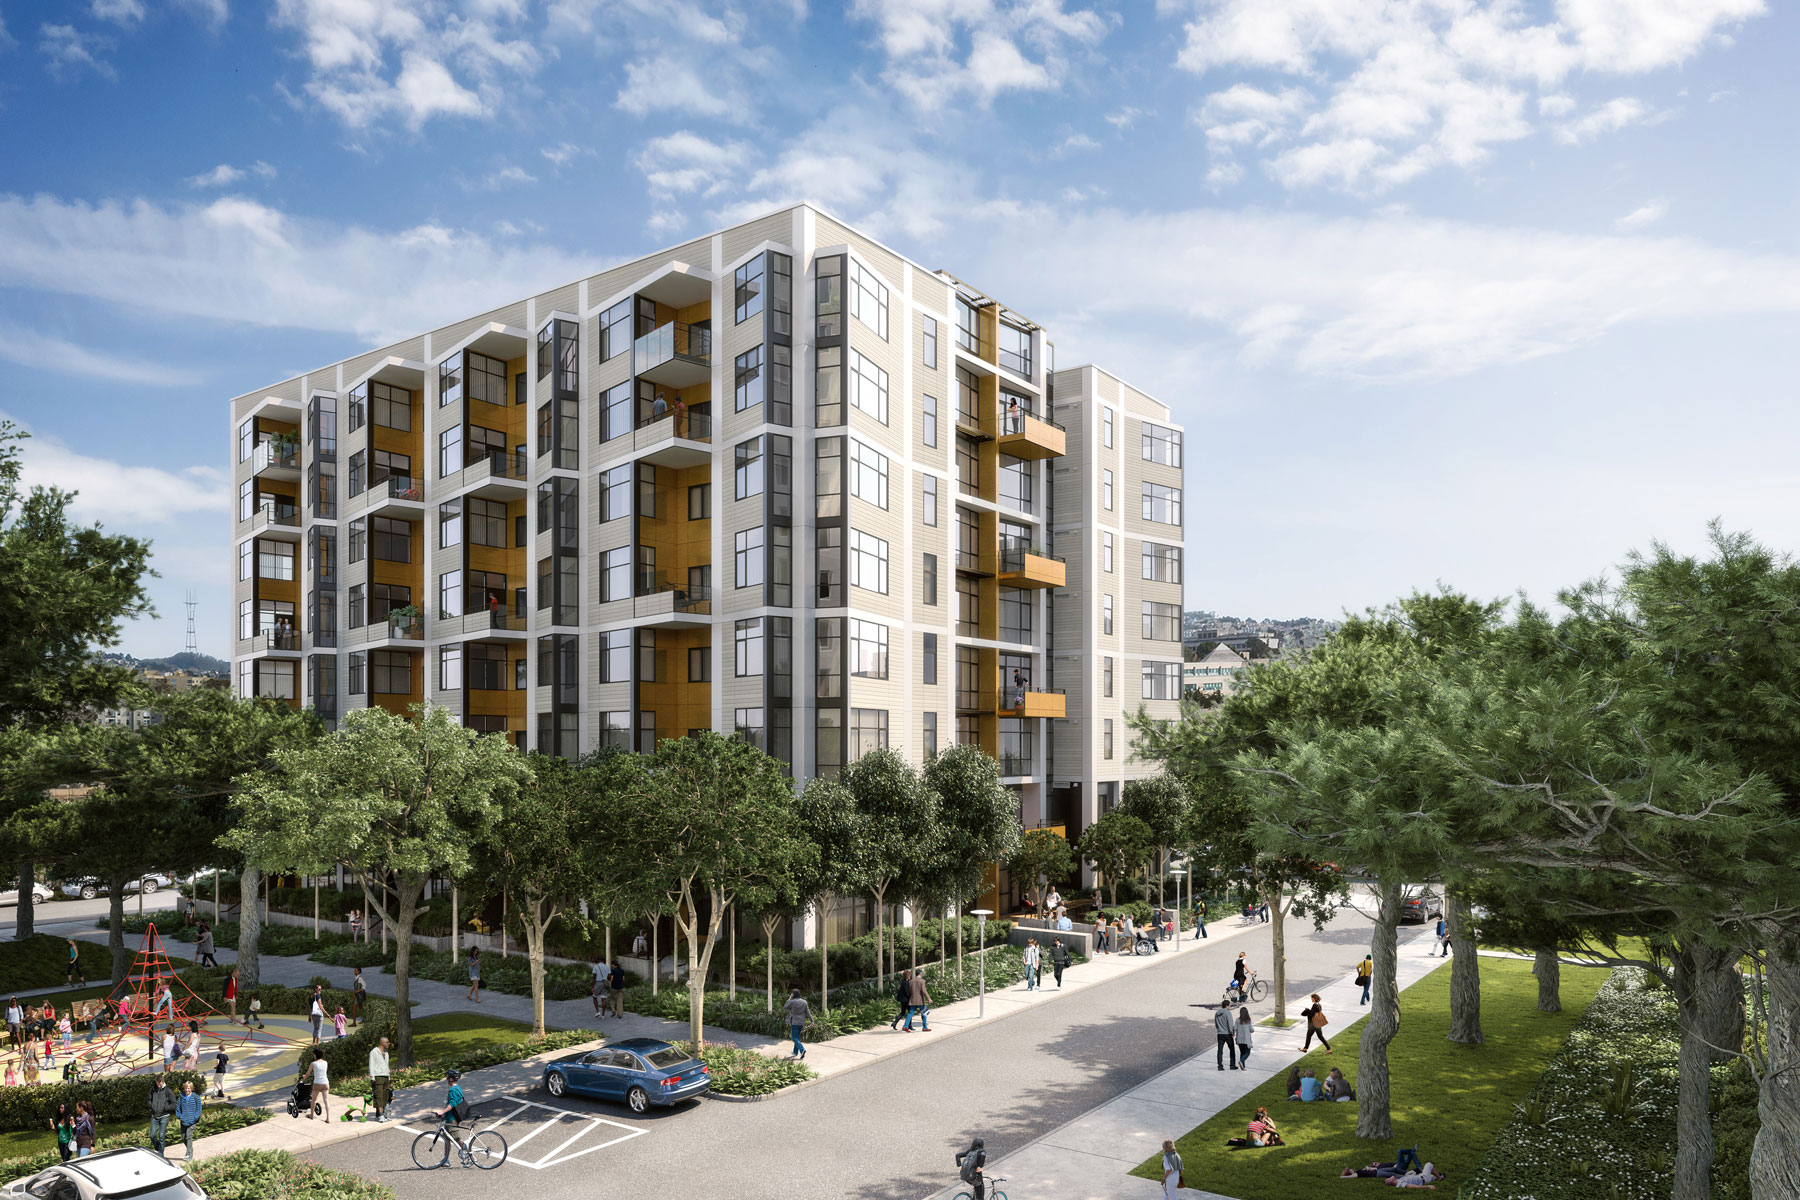 The Parkmerced Revitalization Plan is part of a widespread effort to increase the number of housing units in San Francisco; 300 Arballo’s 89 apartments is the first wave of a new development that will eventually add more than 5,000 residences over a period of 20 to 30 years.